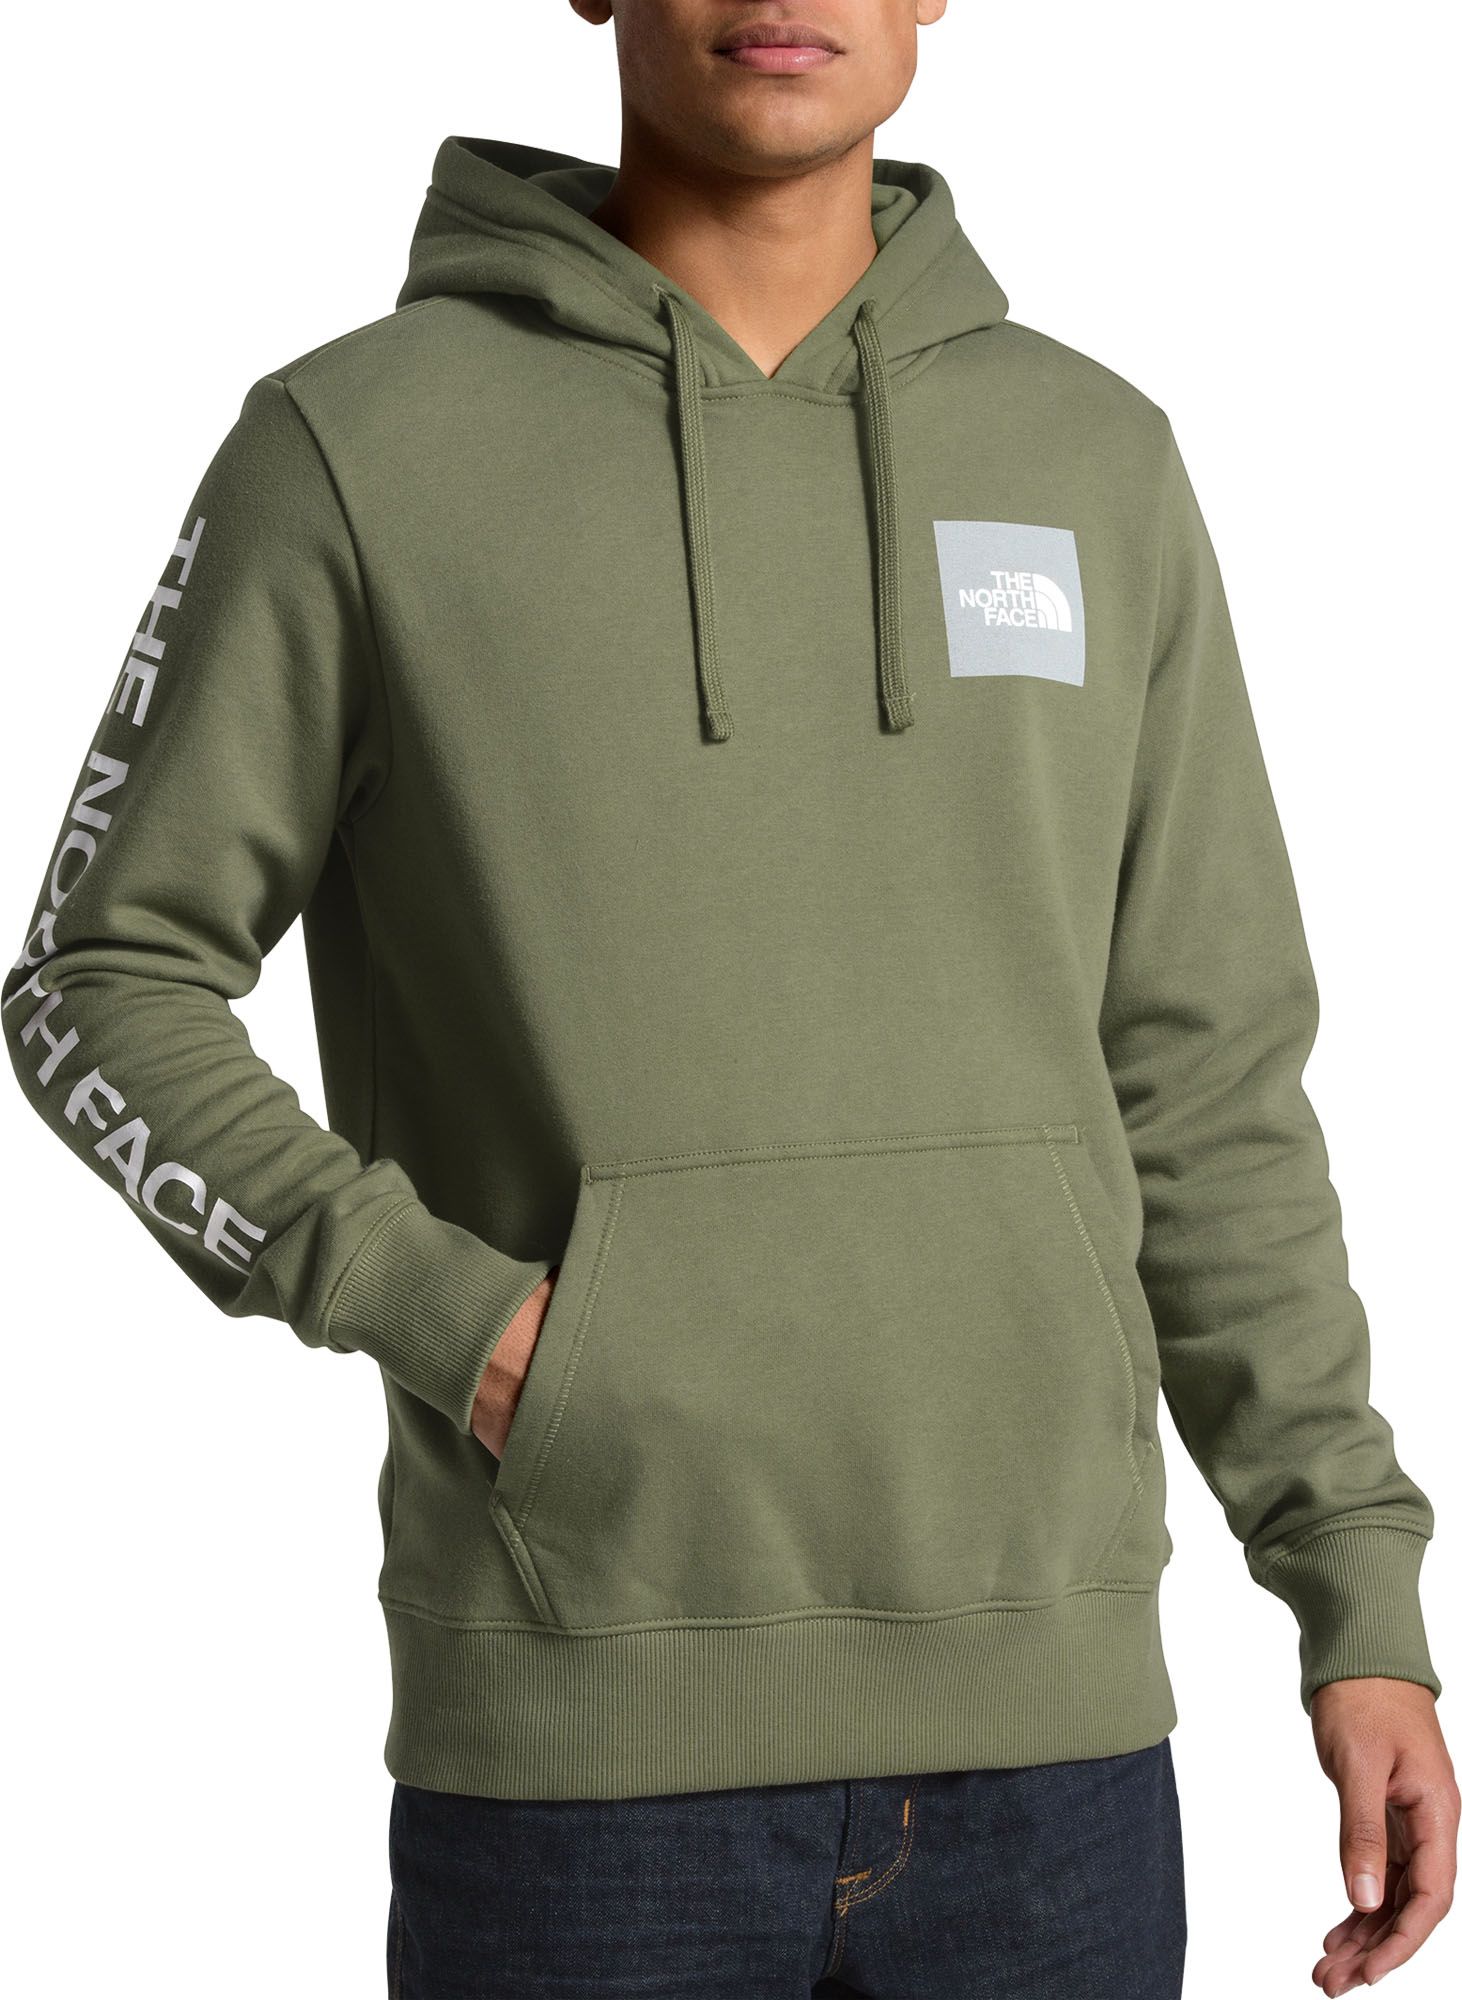 olive green north face hoodie